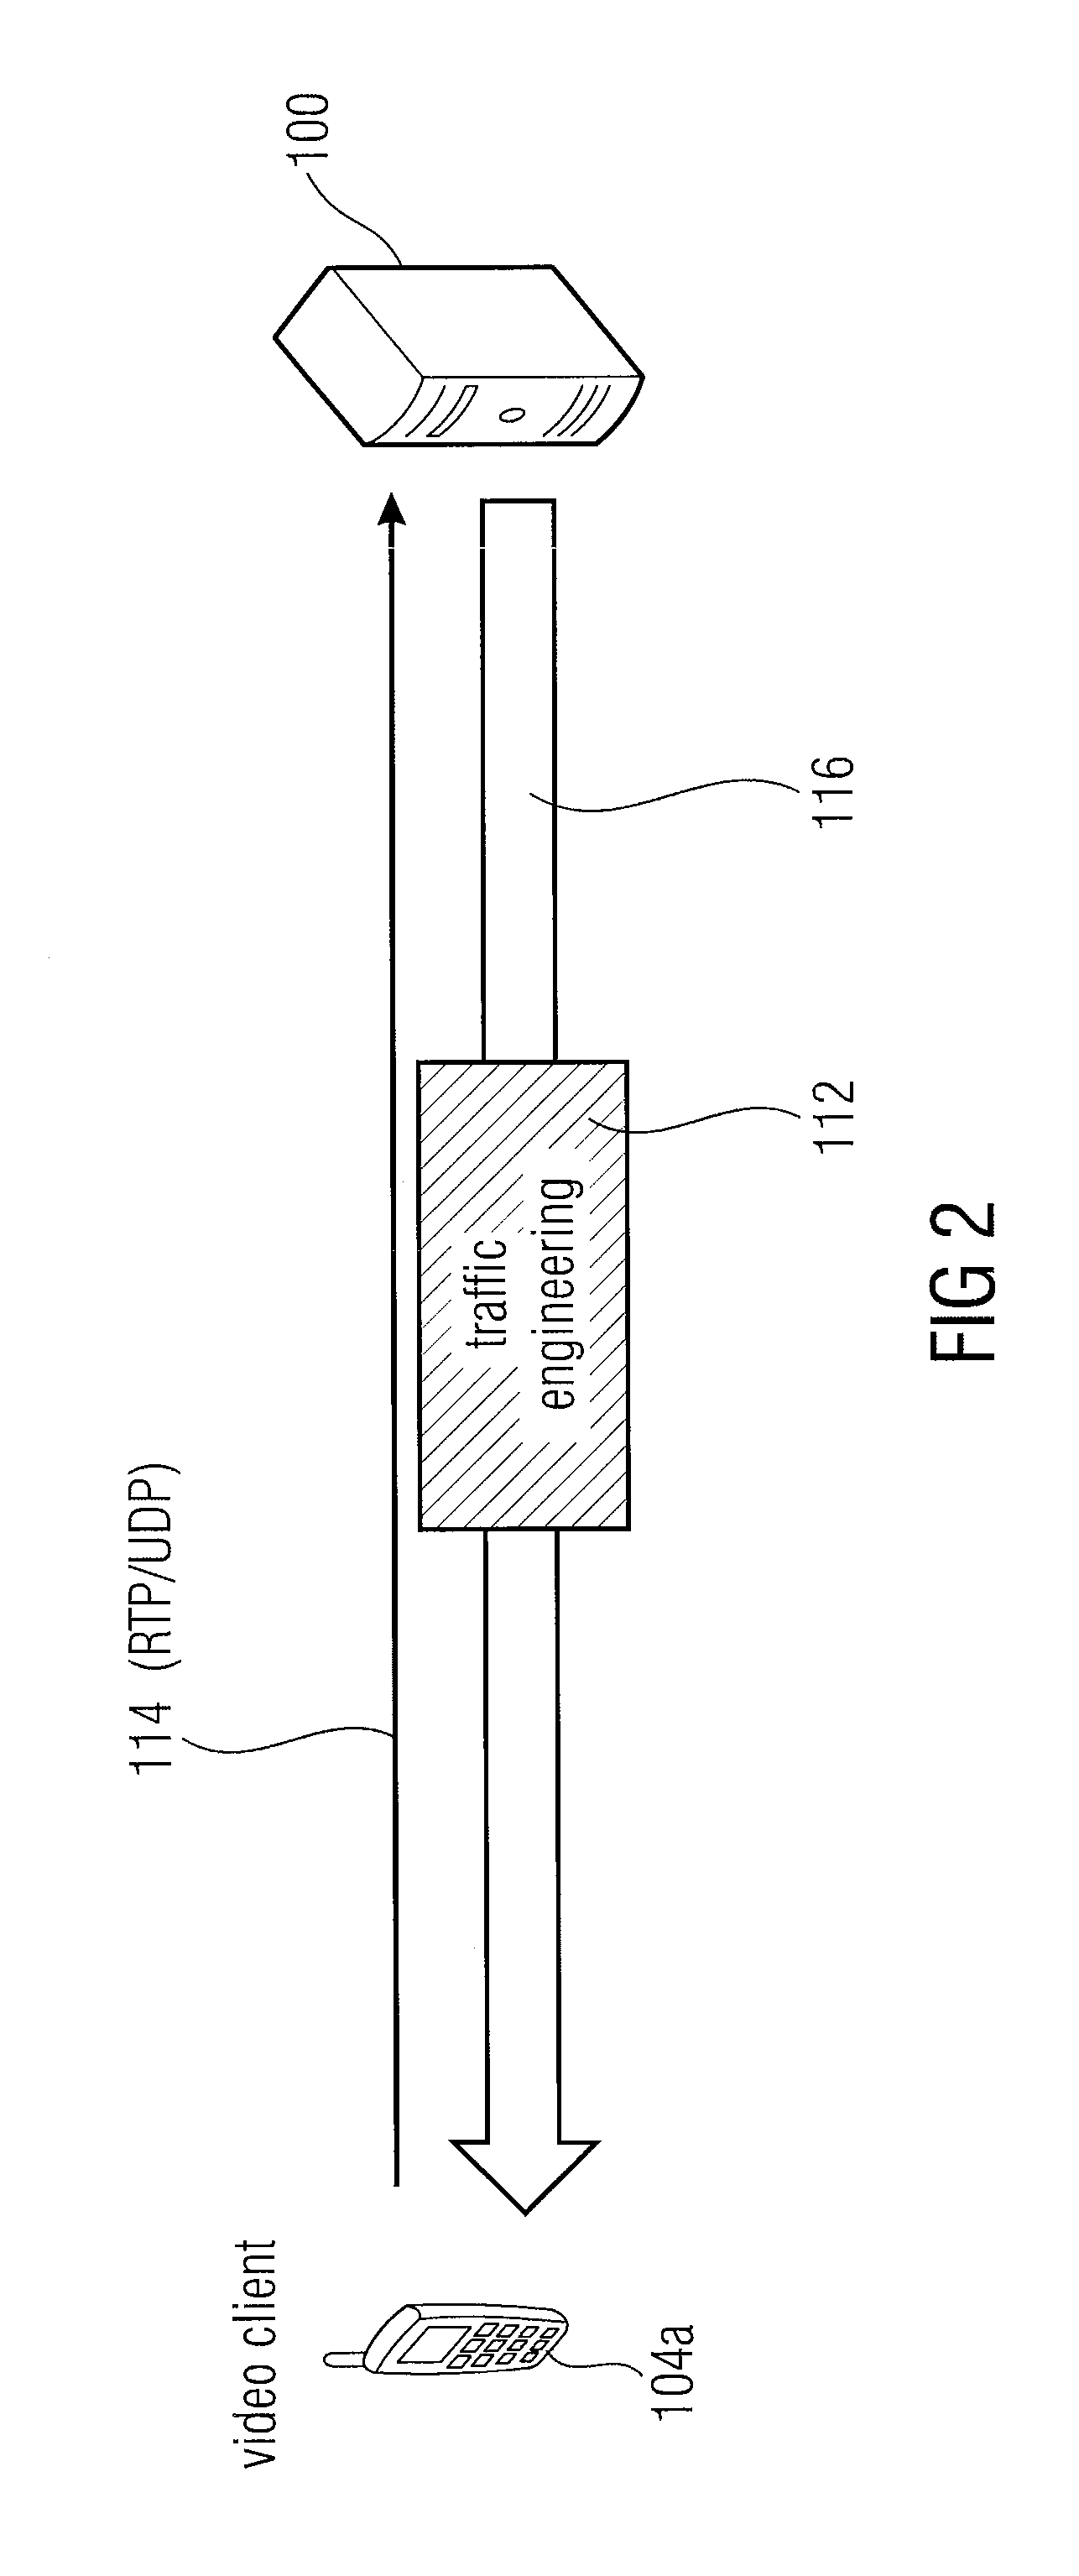 Method, system and network for transmitting multimedia data to a plurality of clients